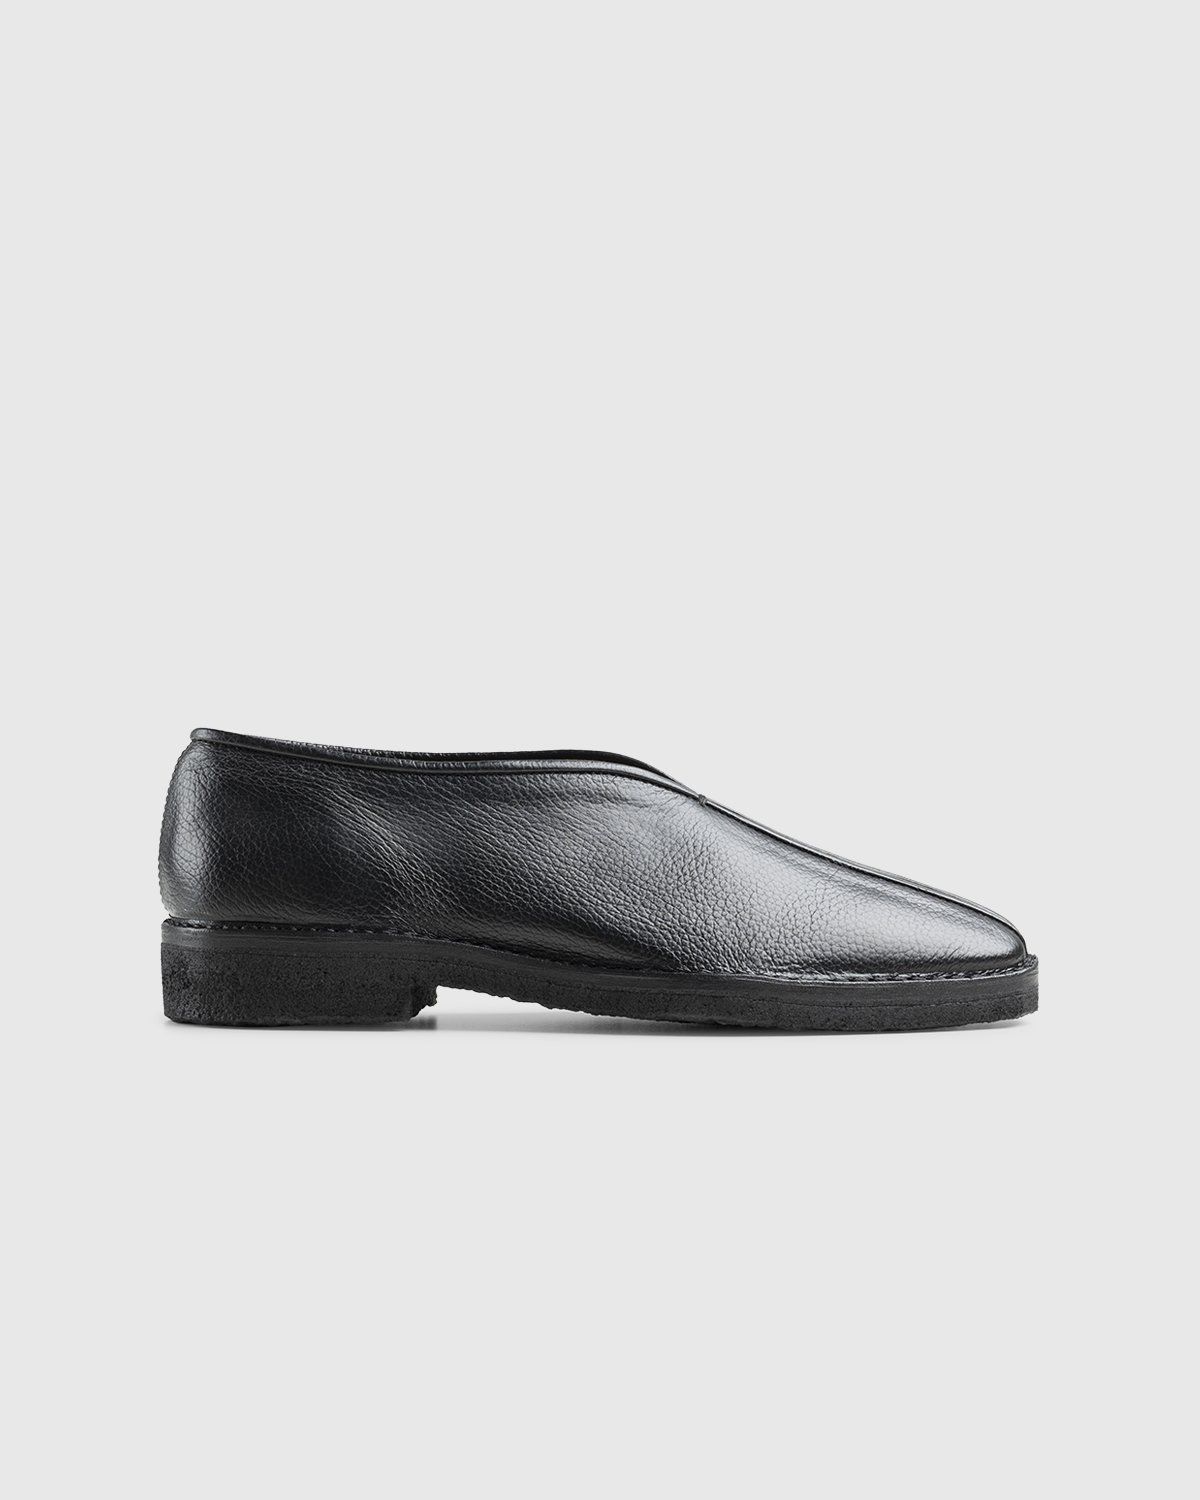 Lemaire – Leather Chinese Slippers Black - Shoes - Black - Image 1